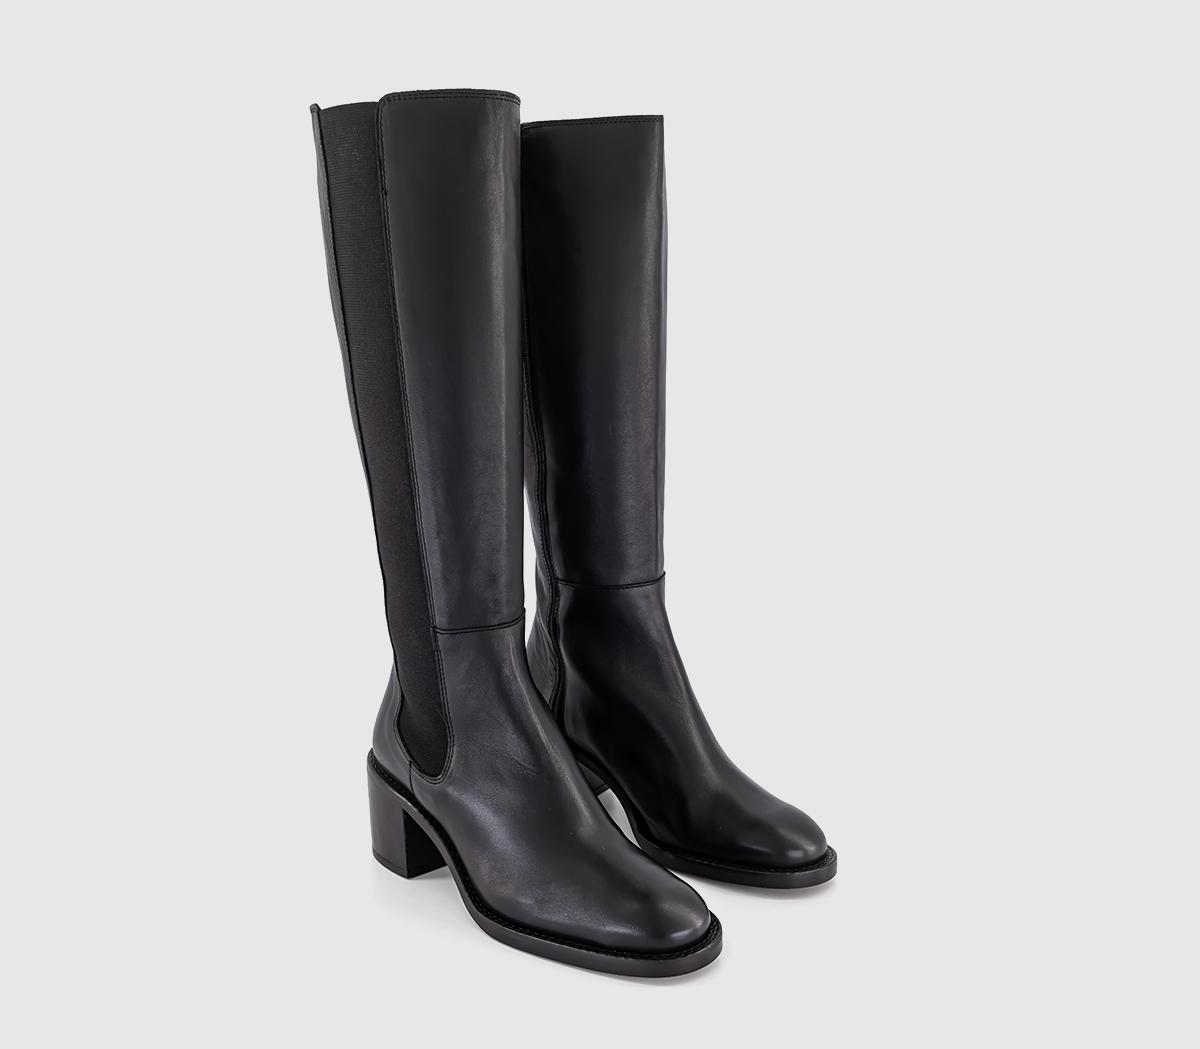 OFFICE Kendall Chelsea Mid Heel Knee Boots Black Leather - Knee High Boots